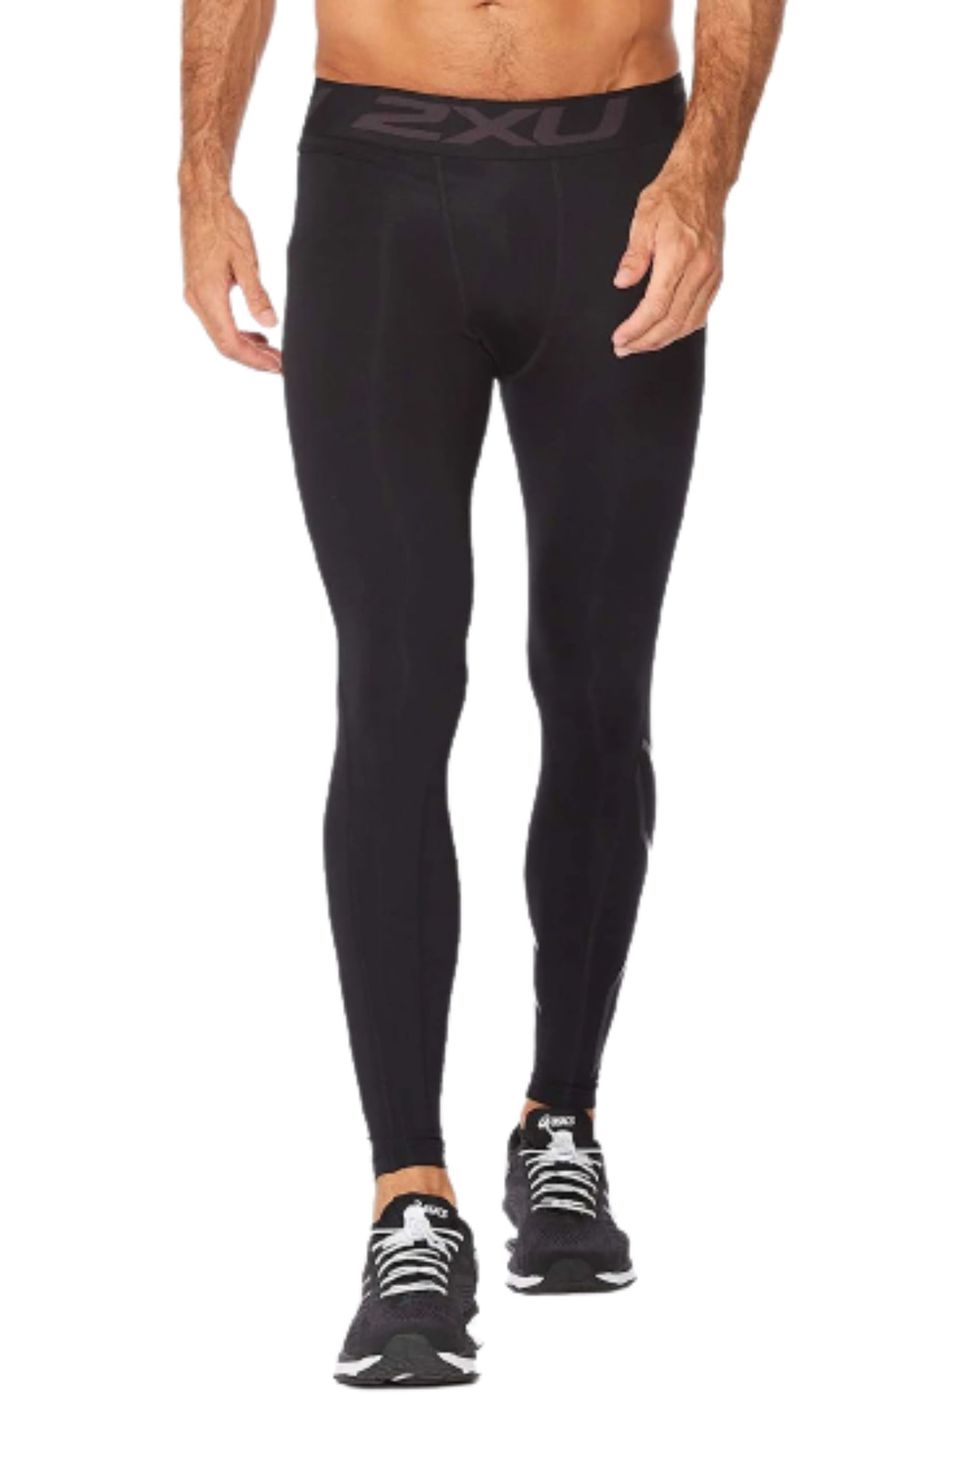 The Best Cold Weather Leggings: Merino Compression Tights FTW